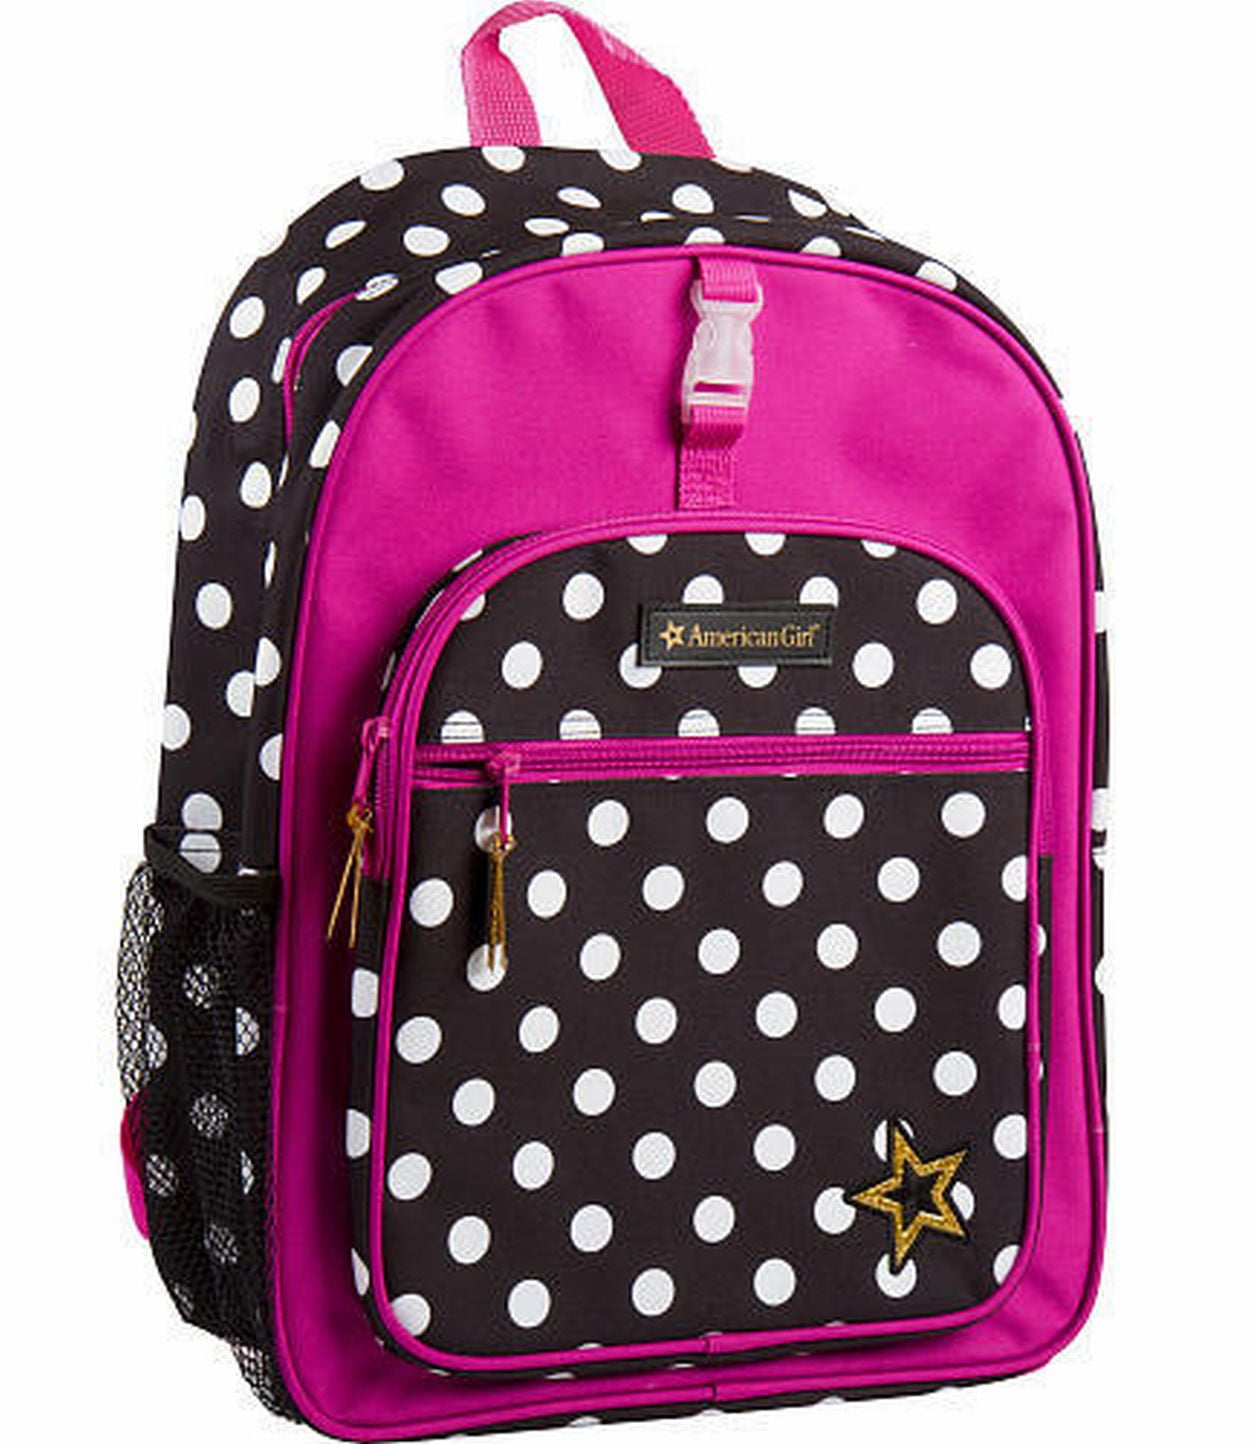 16 inch Backpack Black Polka Dot With Hot Pink Accents - www.waldenwongart.com